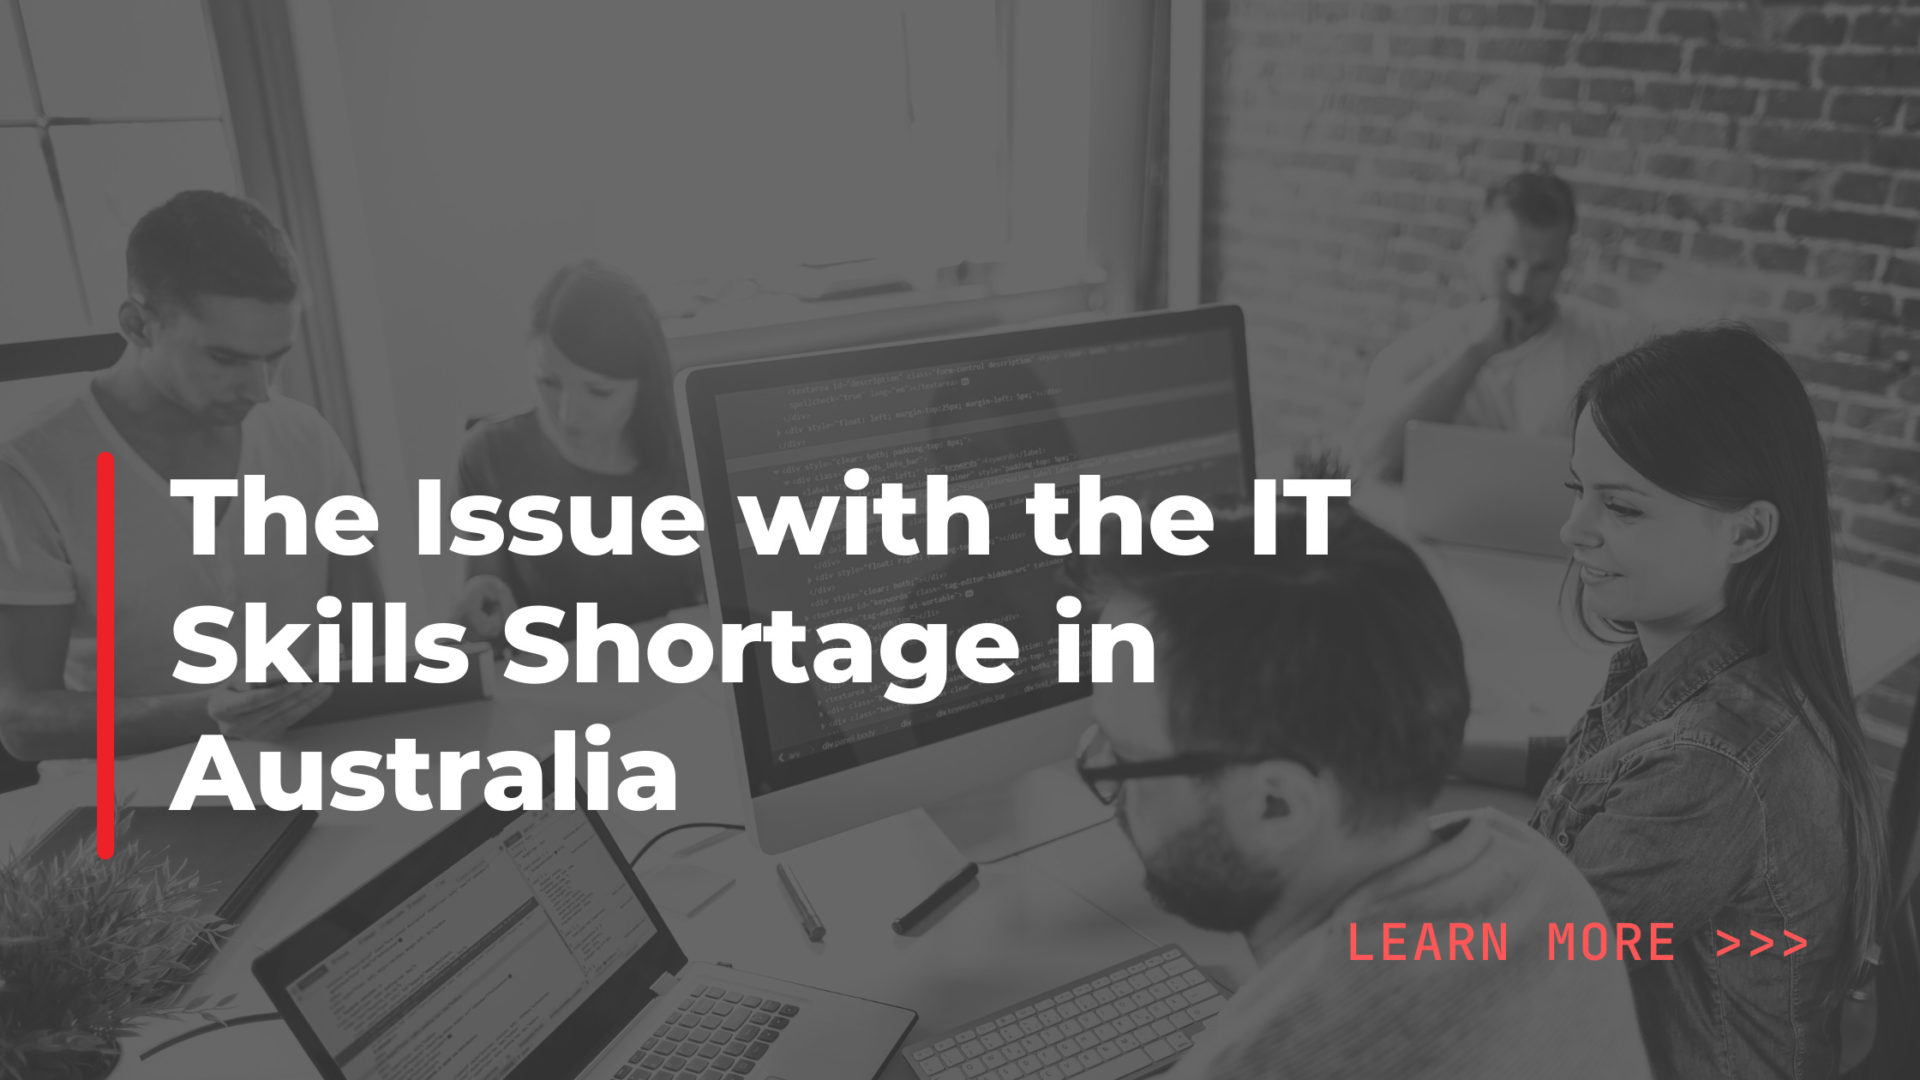 The Issue with the IT Skills Shortage in Australia